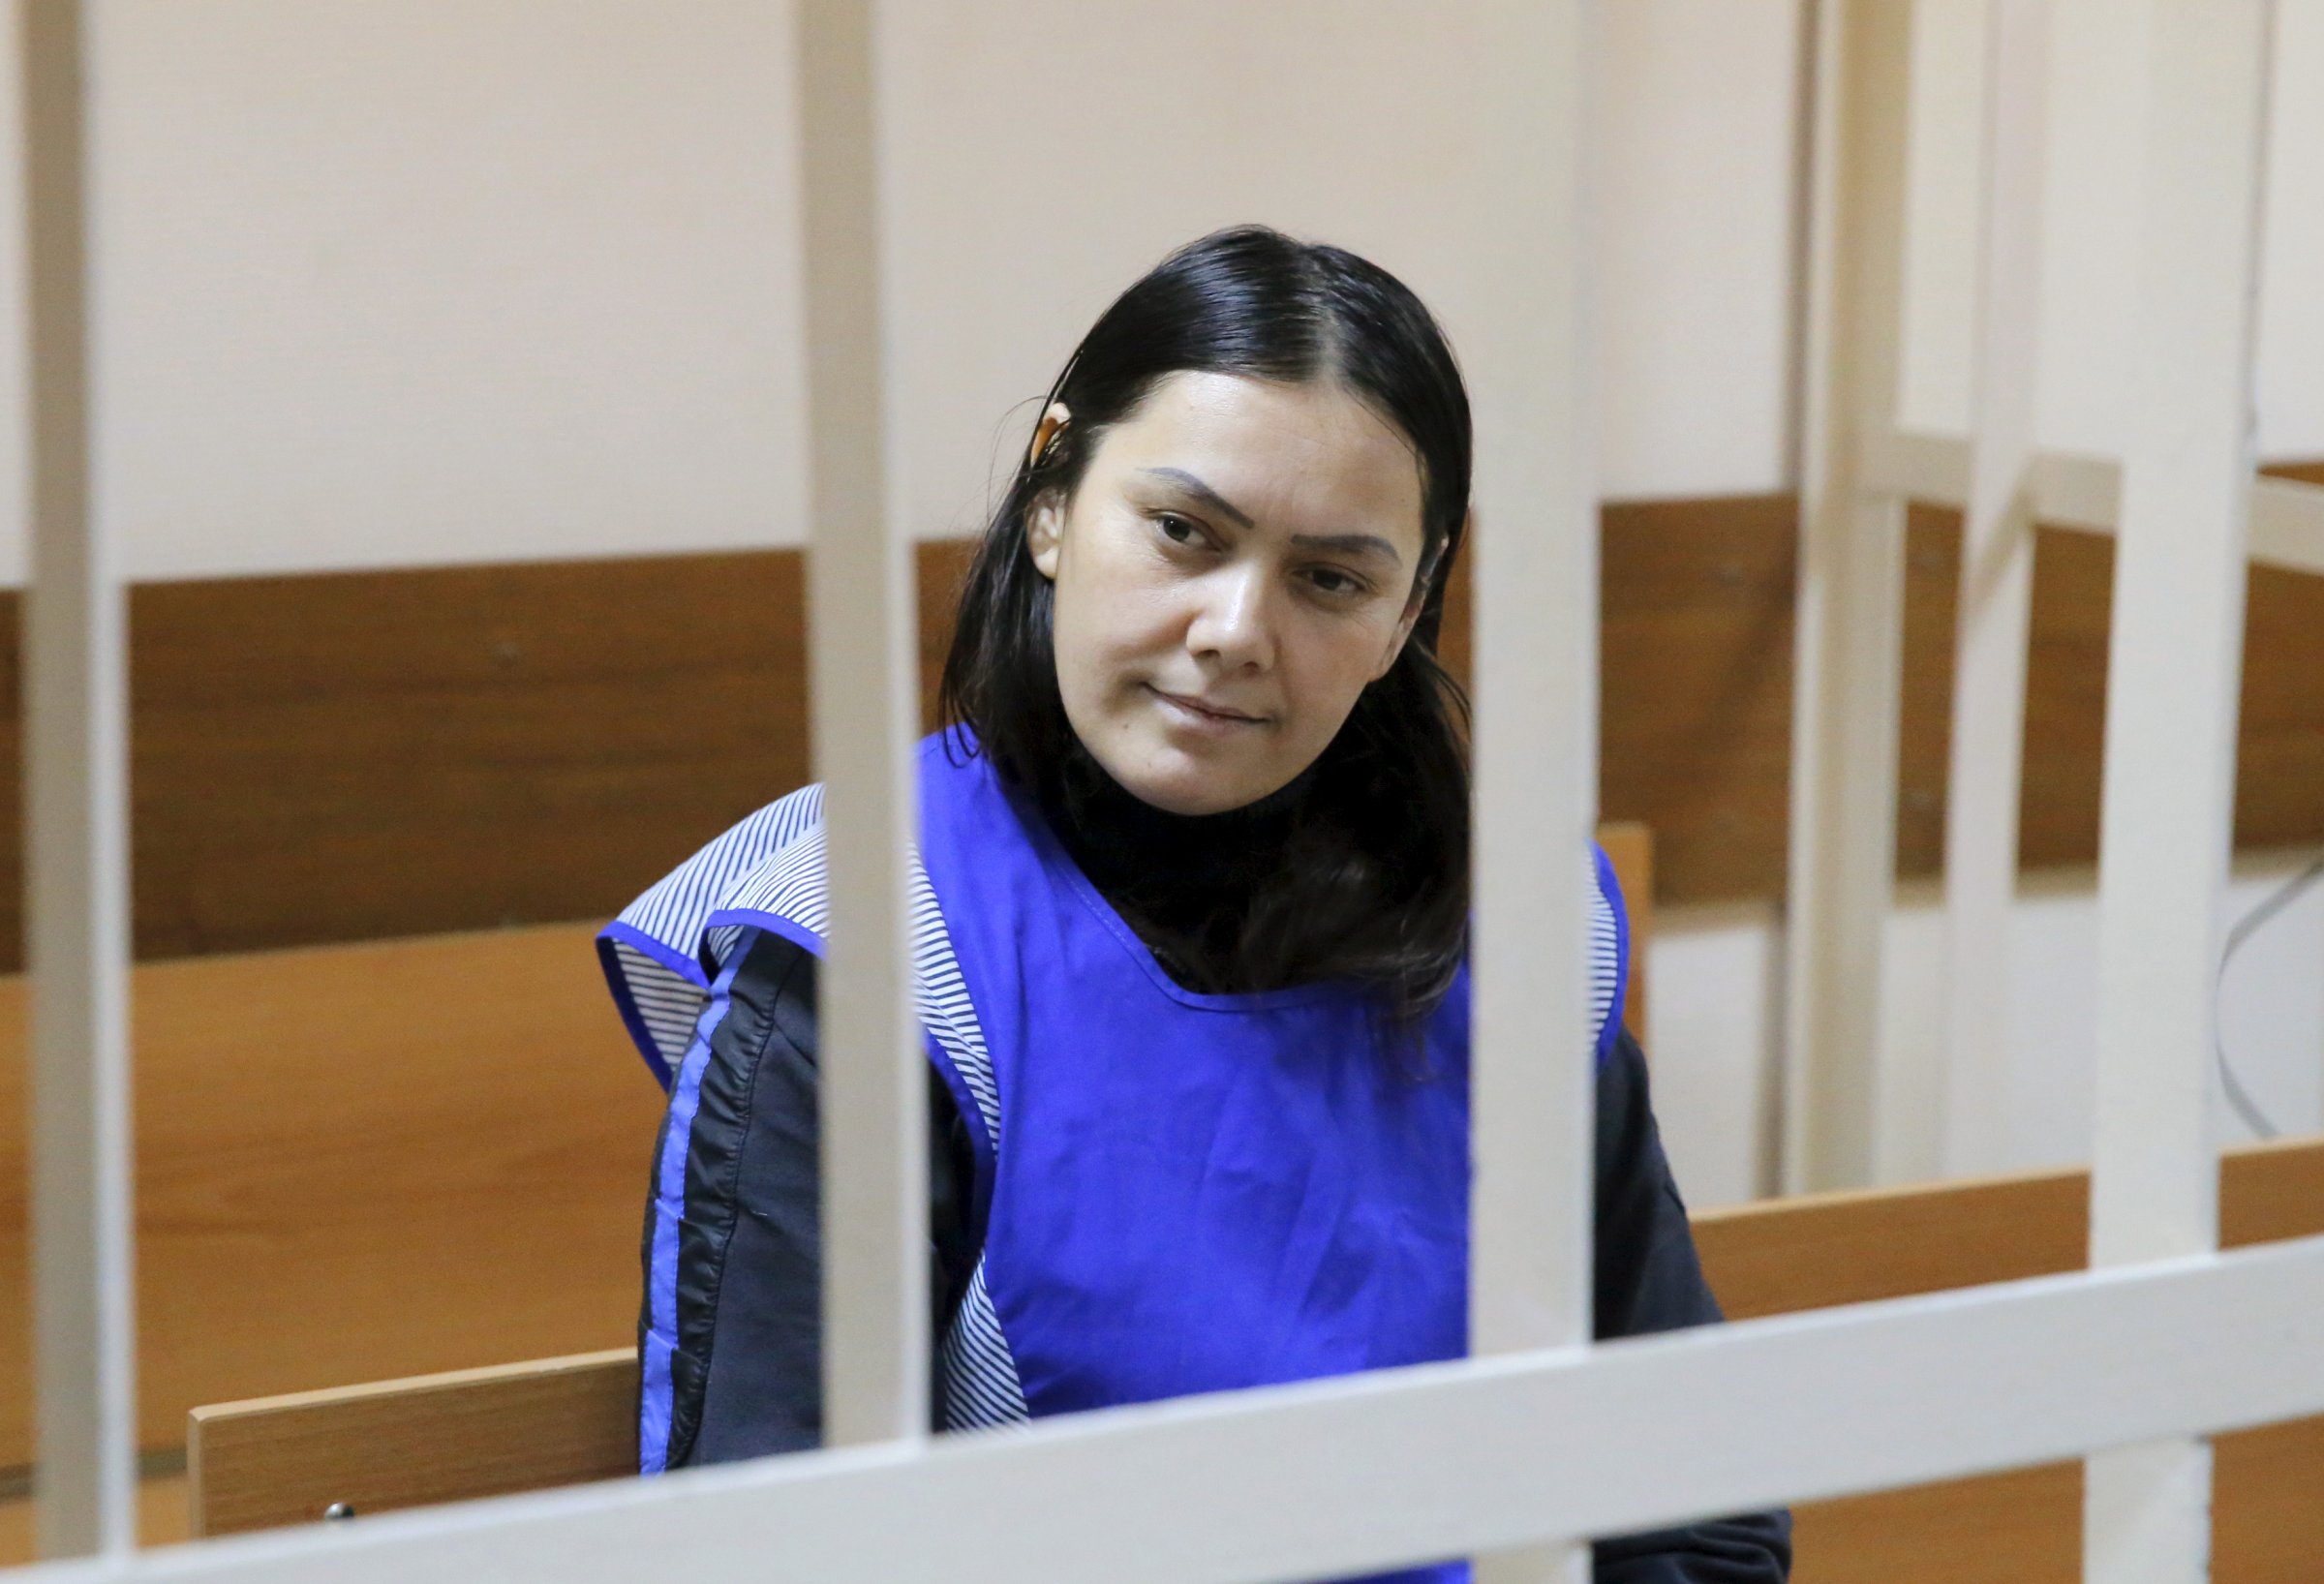 Nanny suspected of murdering a child in her care attends court hearing in Moscow